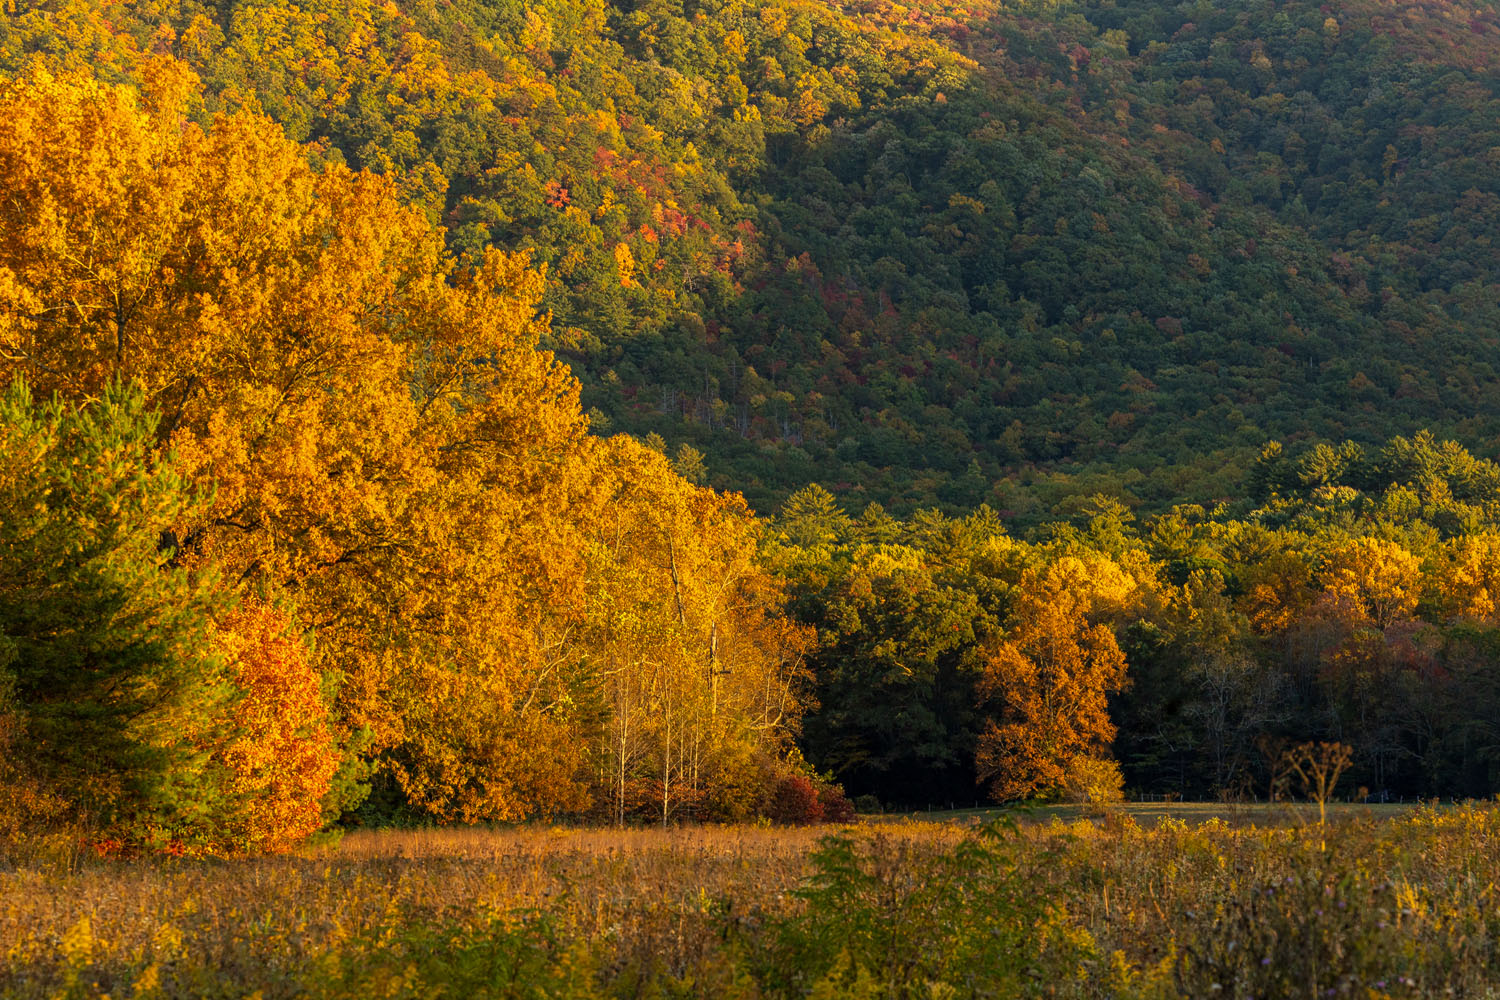 The Cades Cove meadows have turned russet and tans and the surrounding hillsides fairly glow in the evening sun.